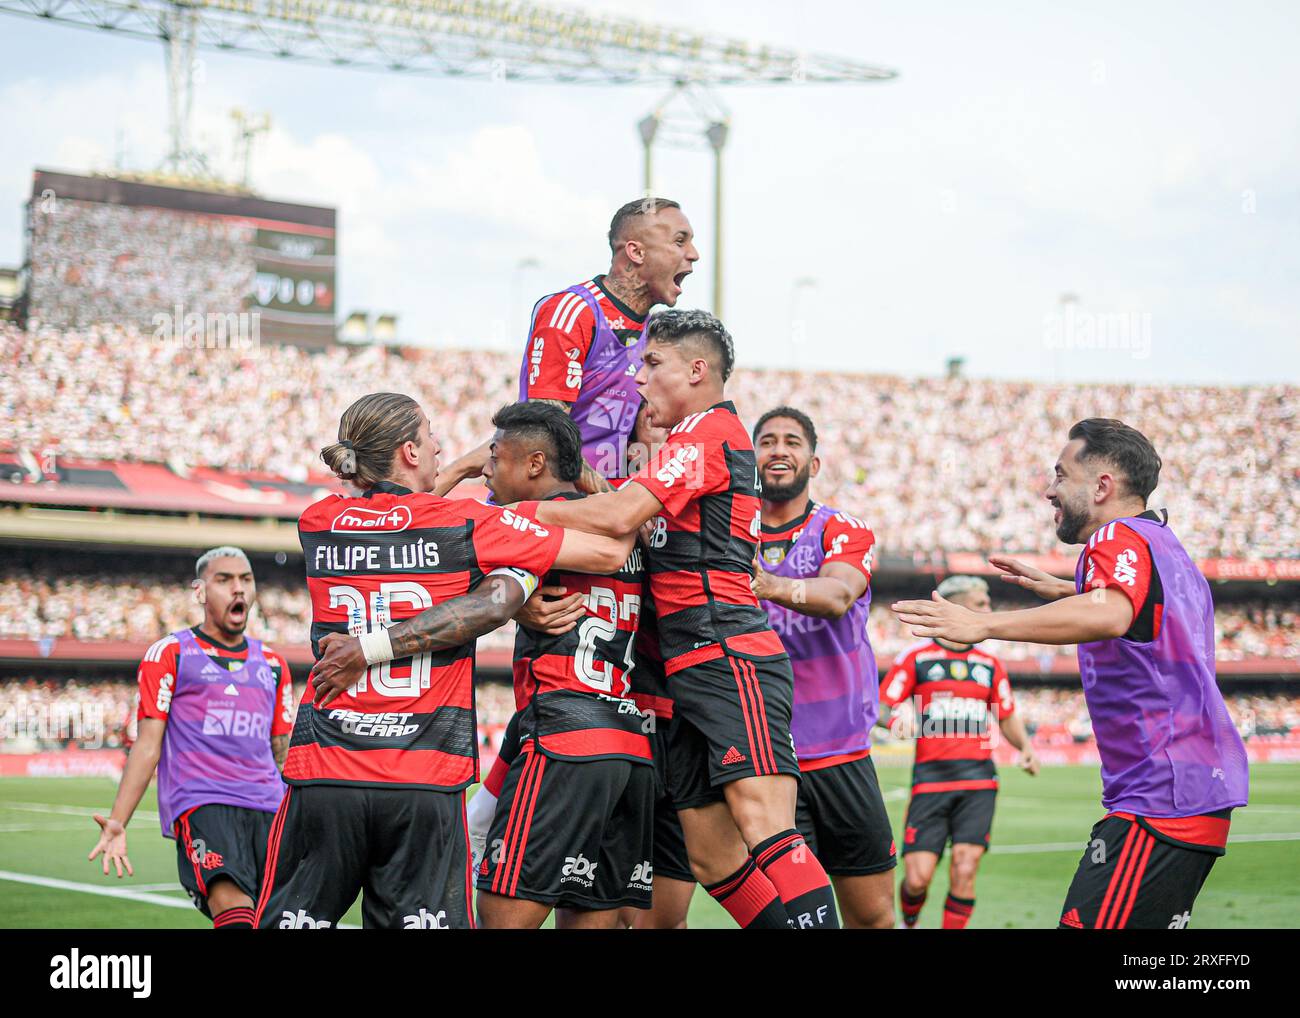 Sao Paulo, Brazil. 24th Sep, 2023. Bruno Henrique of Flamengo, celebrates after scoring the first goal of his team with Filipe Luis, Luiz Araujo, Everton Cebolinha and Everton Ribeiro during the match between Sao Paulo and Flamengo, for the second leg of Final Brazil Cup 2023, at Morumbi Stadium, in Sao Paulo on September 24. Photo: Gledston Tavares/DiaEsportivo/Alamy Live News Credit: DiaEsportivo/Alamy Live News Stock Photo